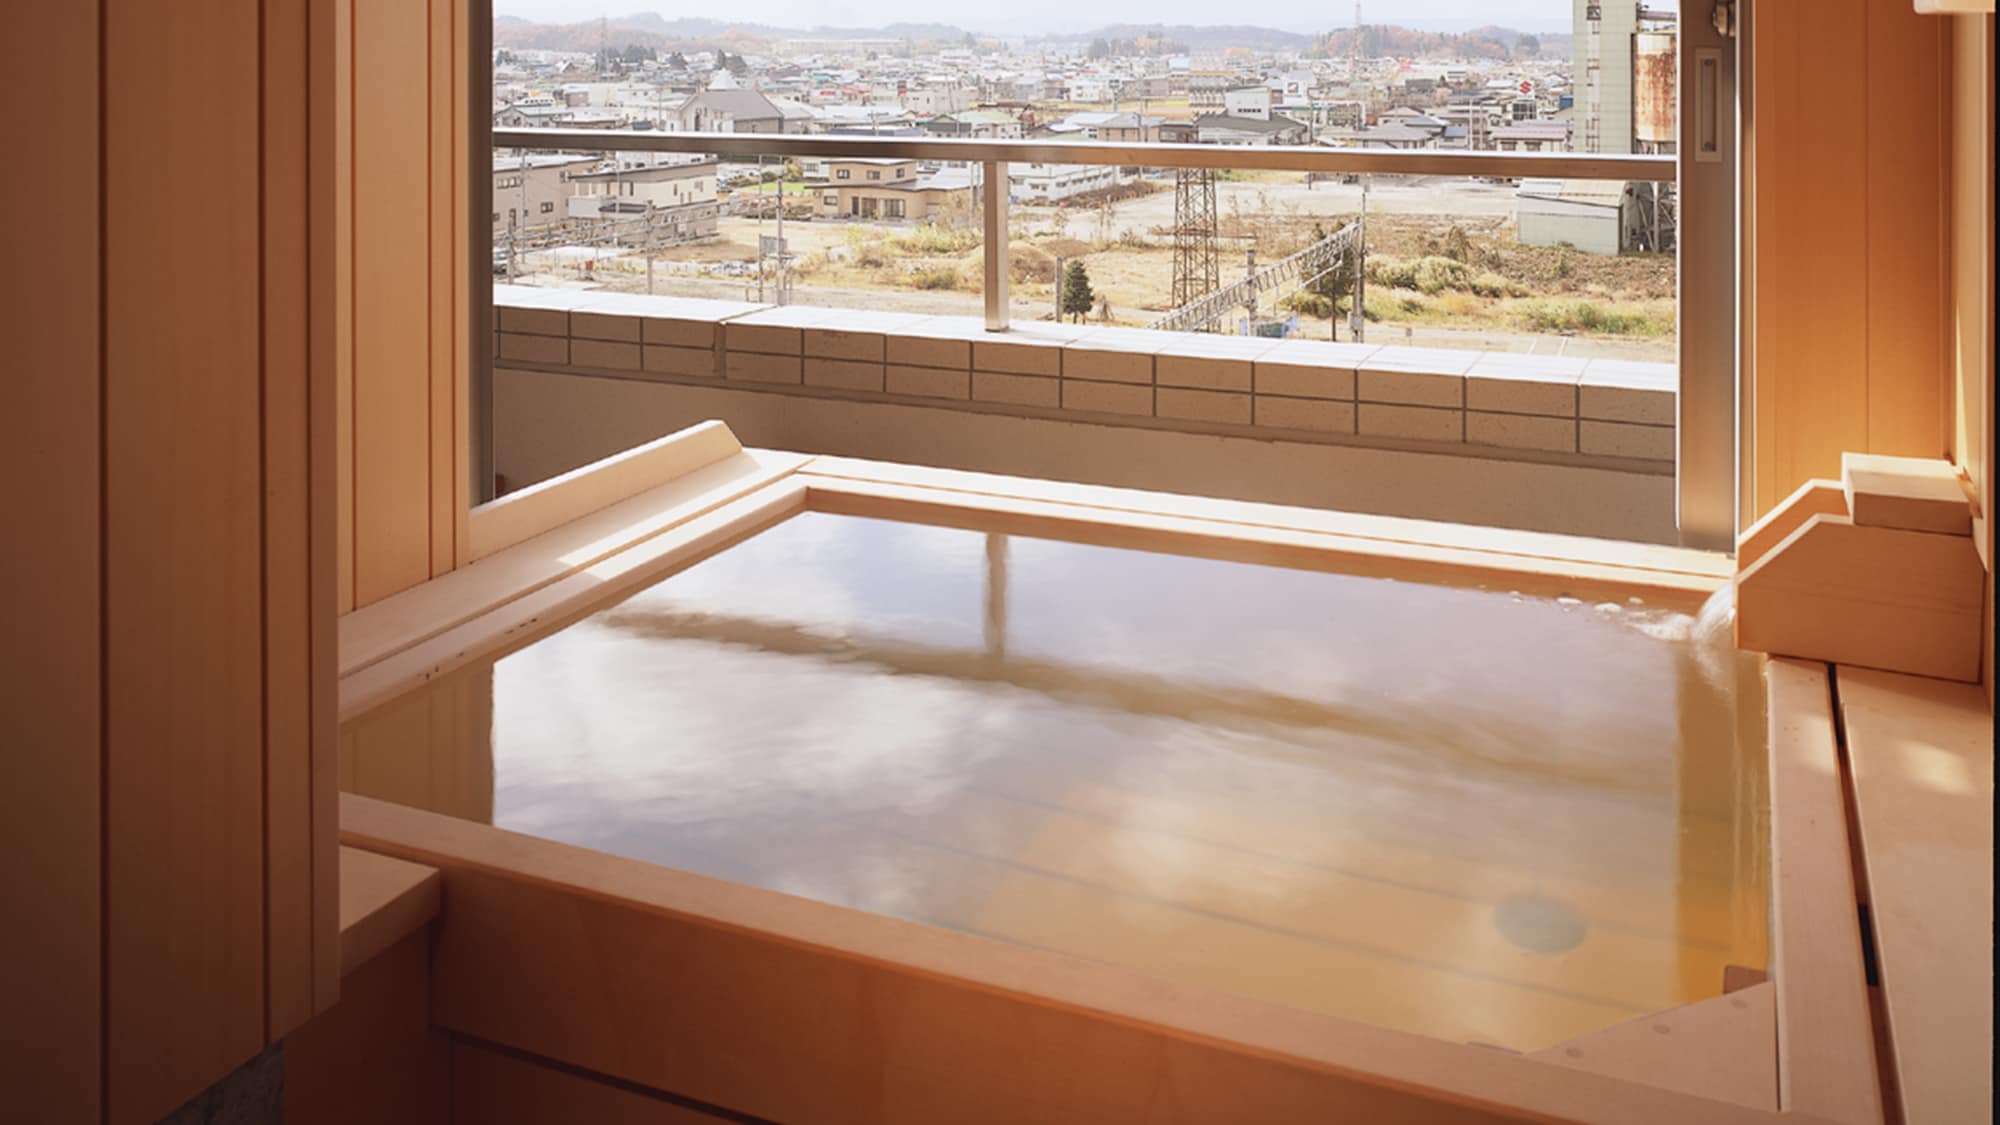 [Room with open-air bath] The open-air bath made of 100% natural hot springs and made of Japanese cypress can be used freely 24 hours a day.